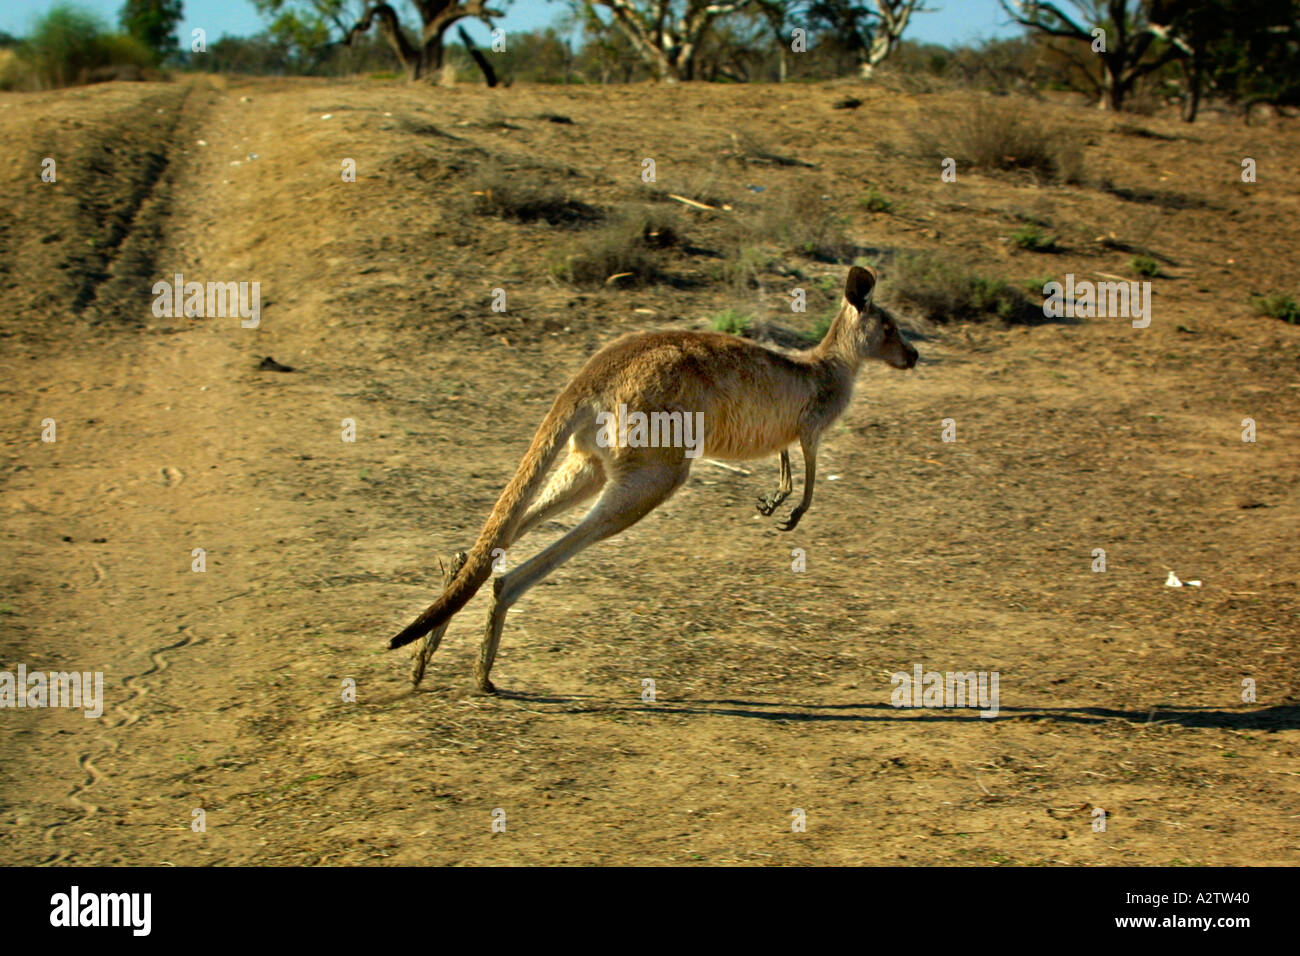 An emaciated Kangaroo during drought conditions in Western New South Wales Australia Stock Photo